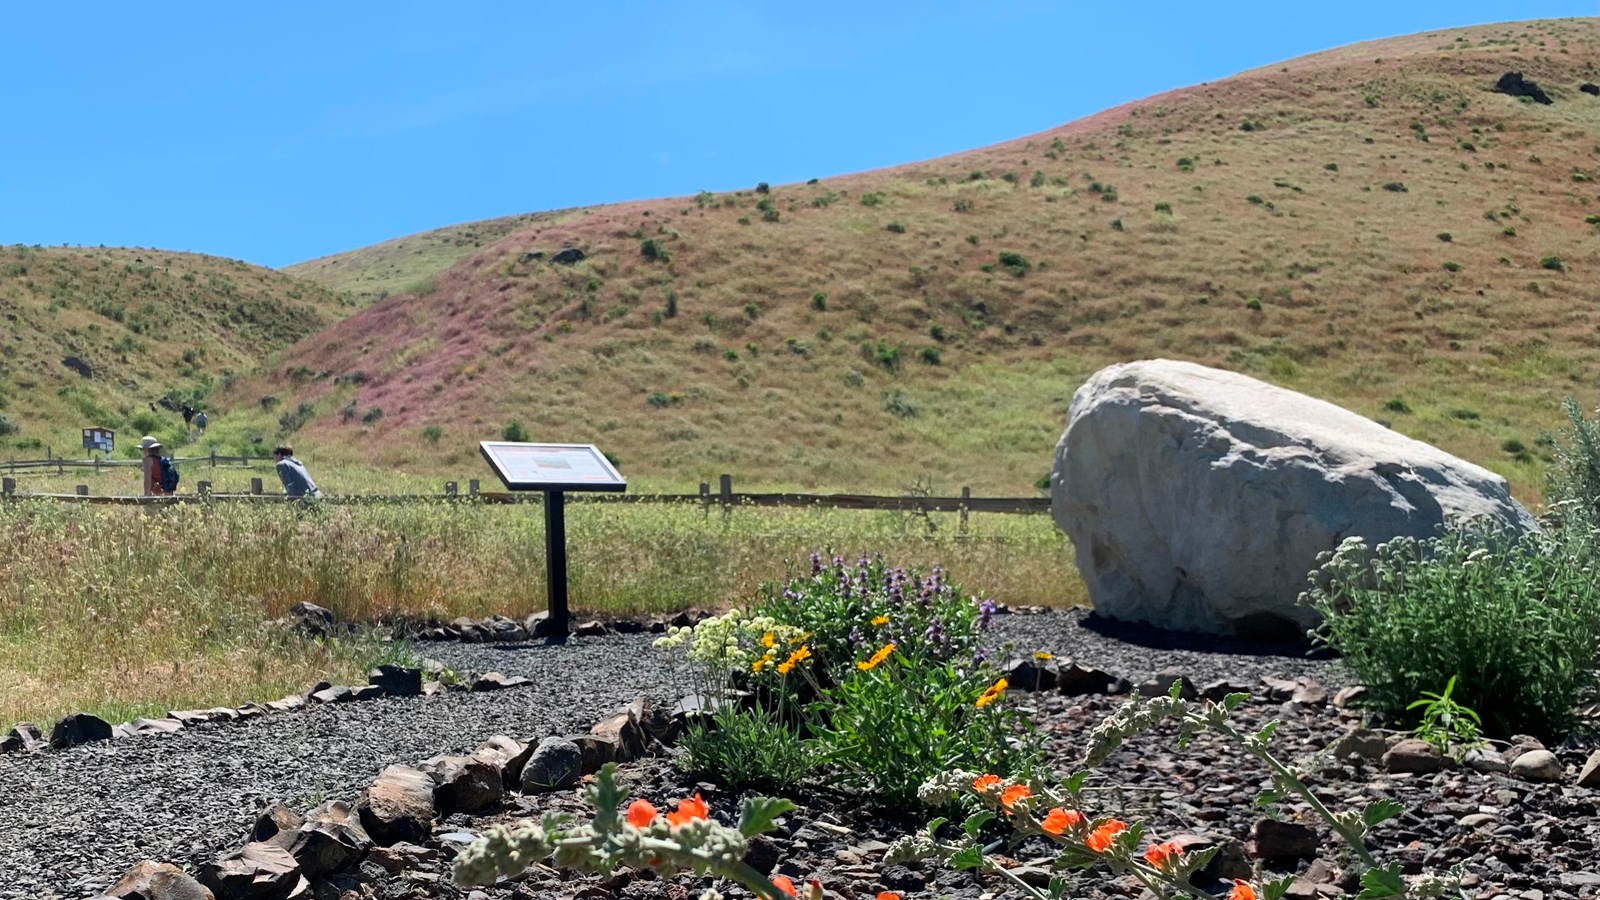 local flower garden floods erratic and wayside exhibit in the foreground of Badger Mountain